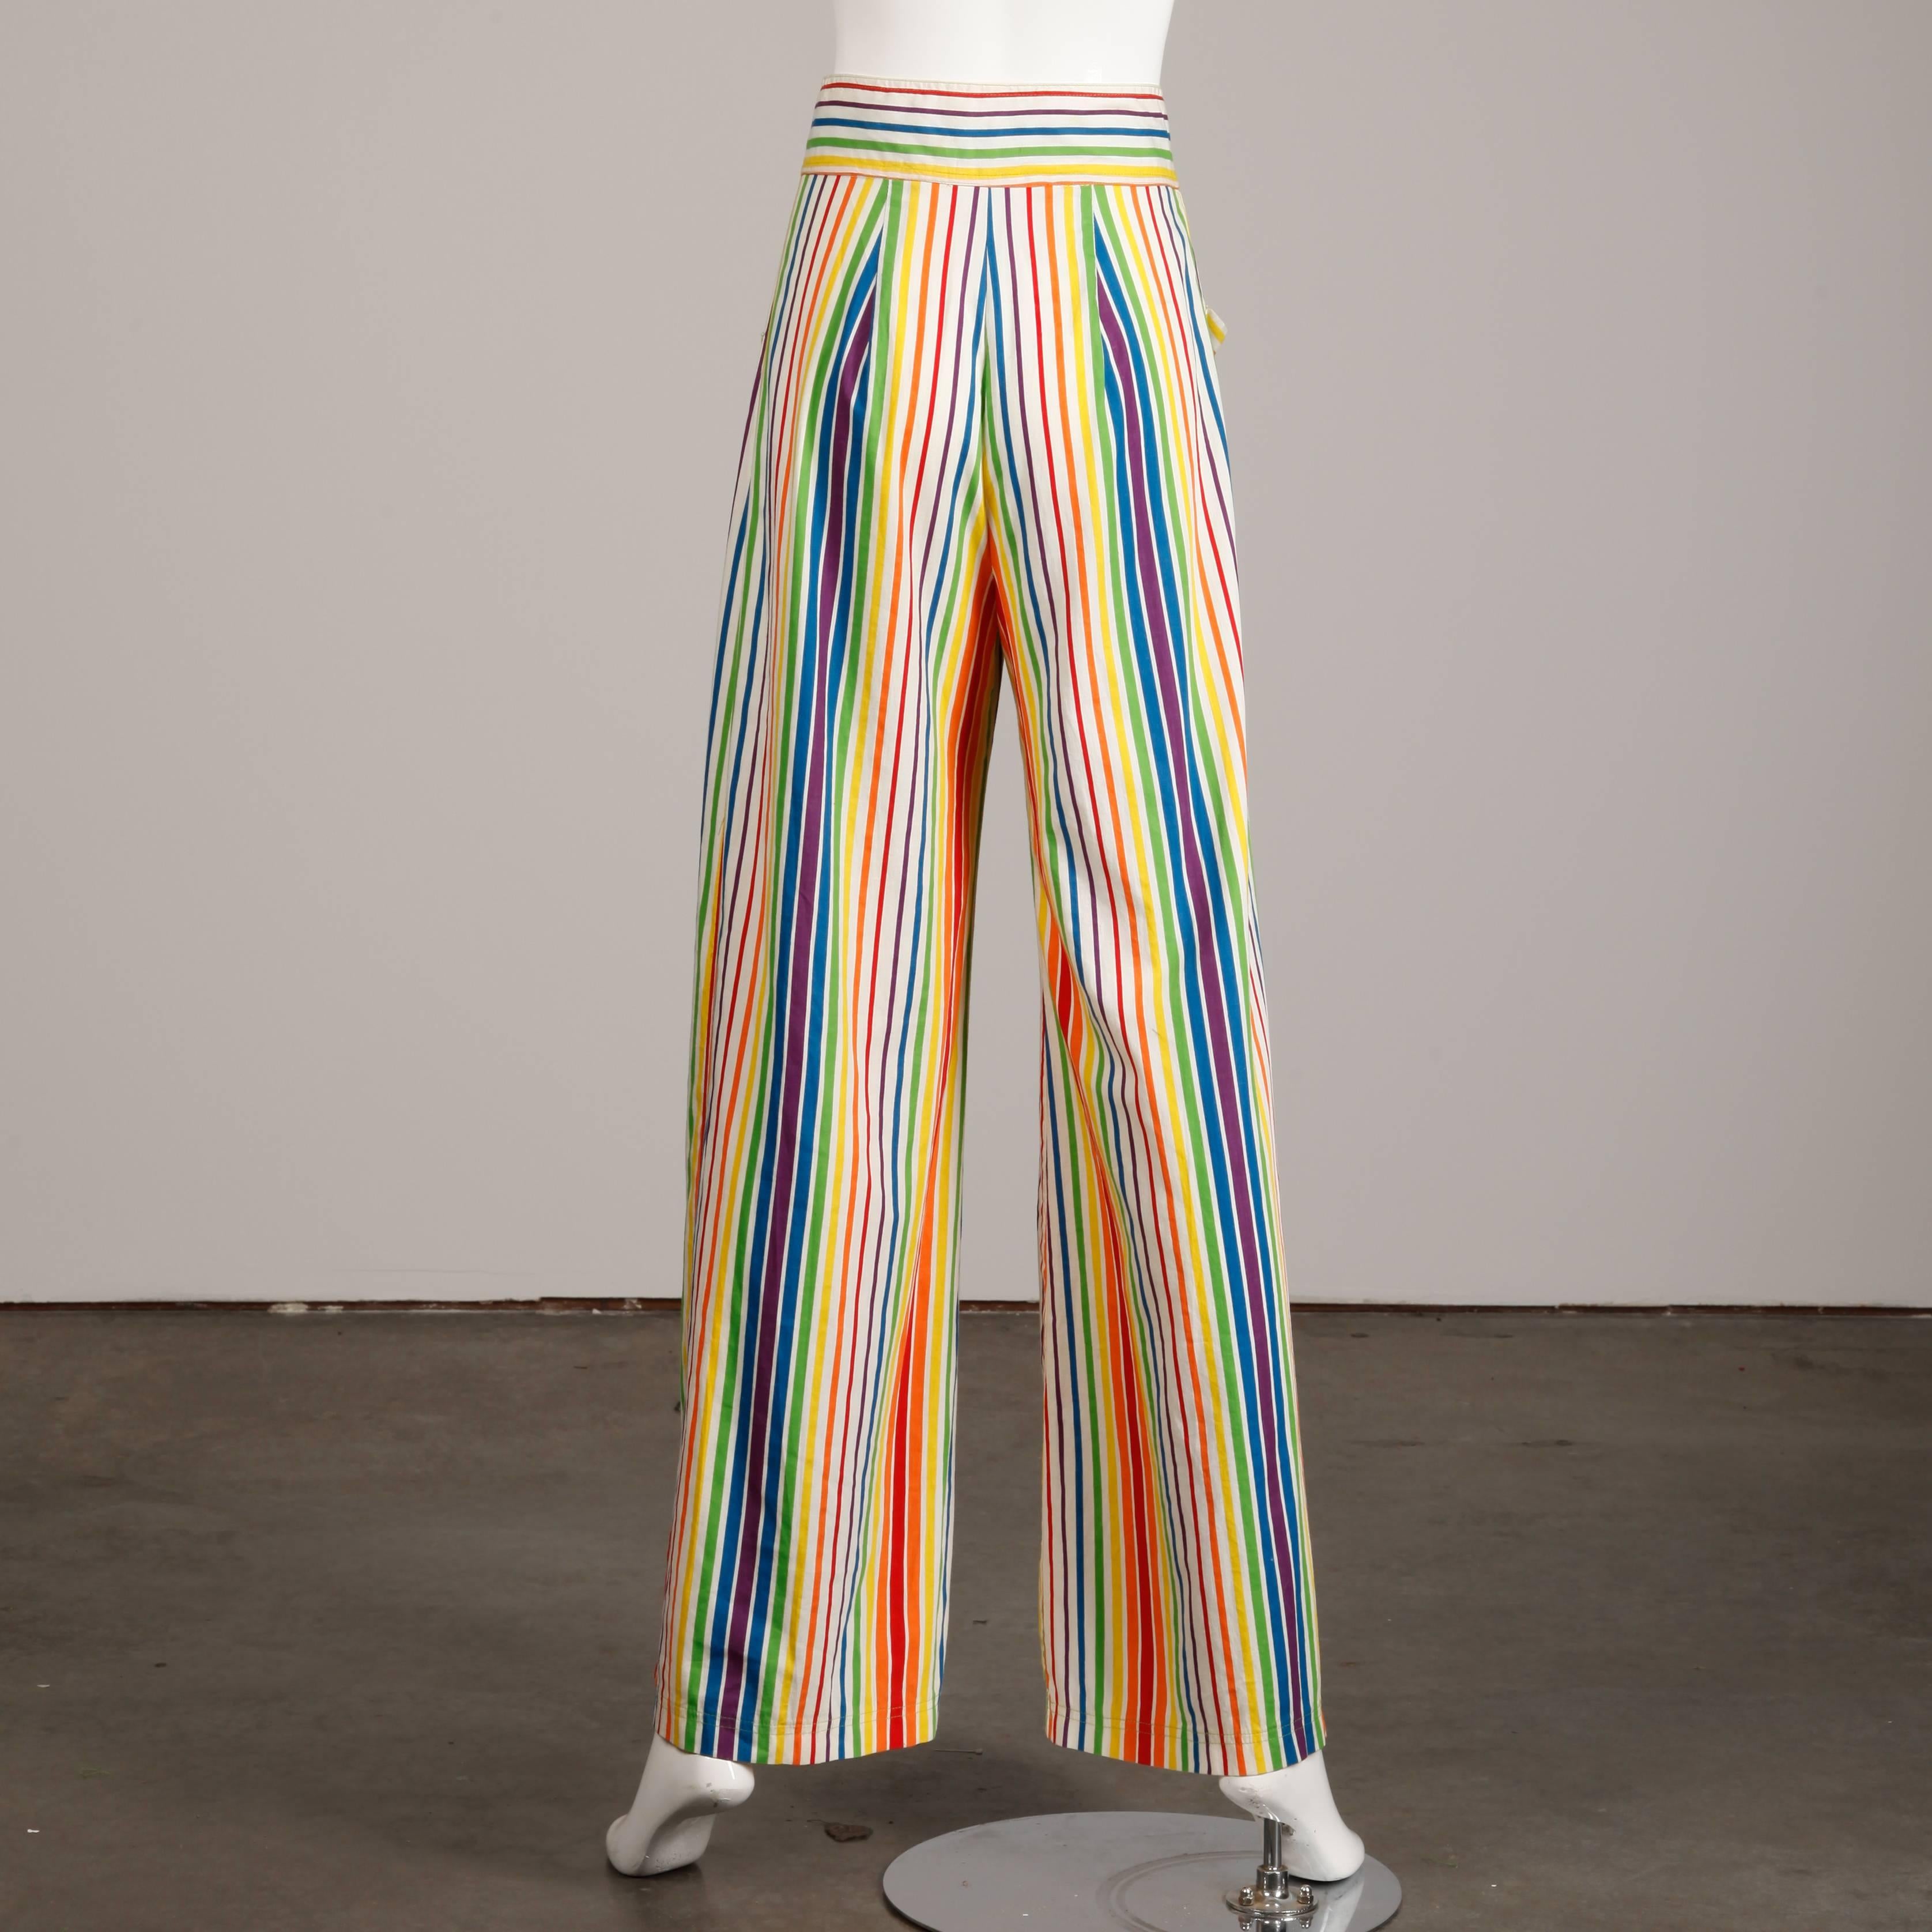 Betsey Johnson for Alley Cat Vintage Rainbow Striped Palazzo Pants, 1970s For Sale 4